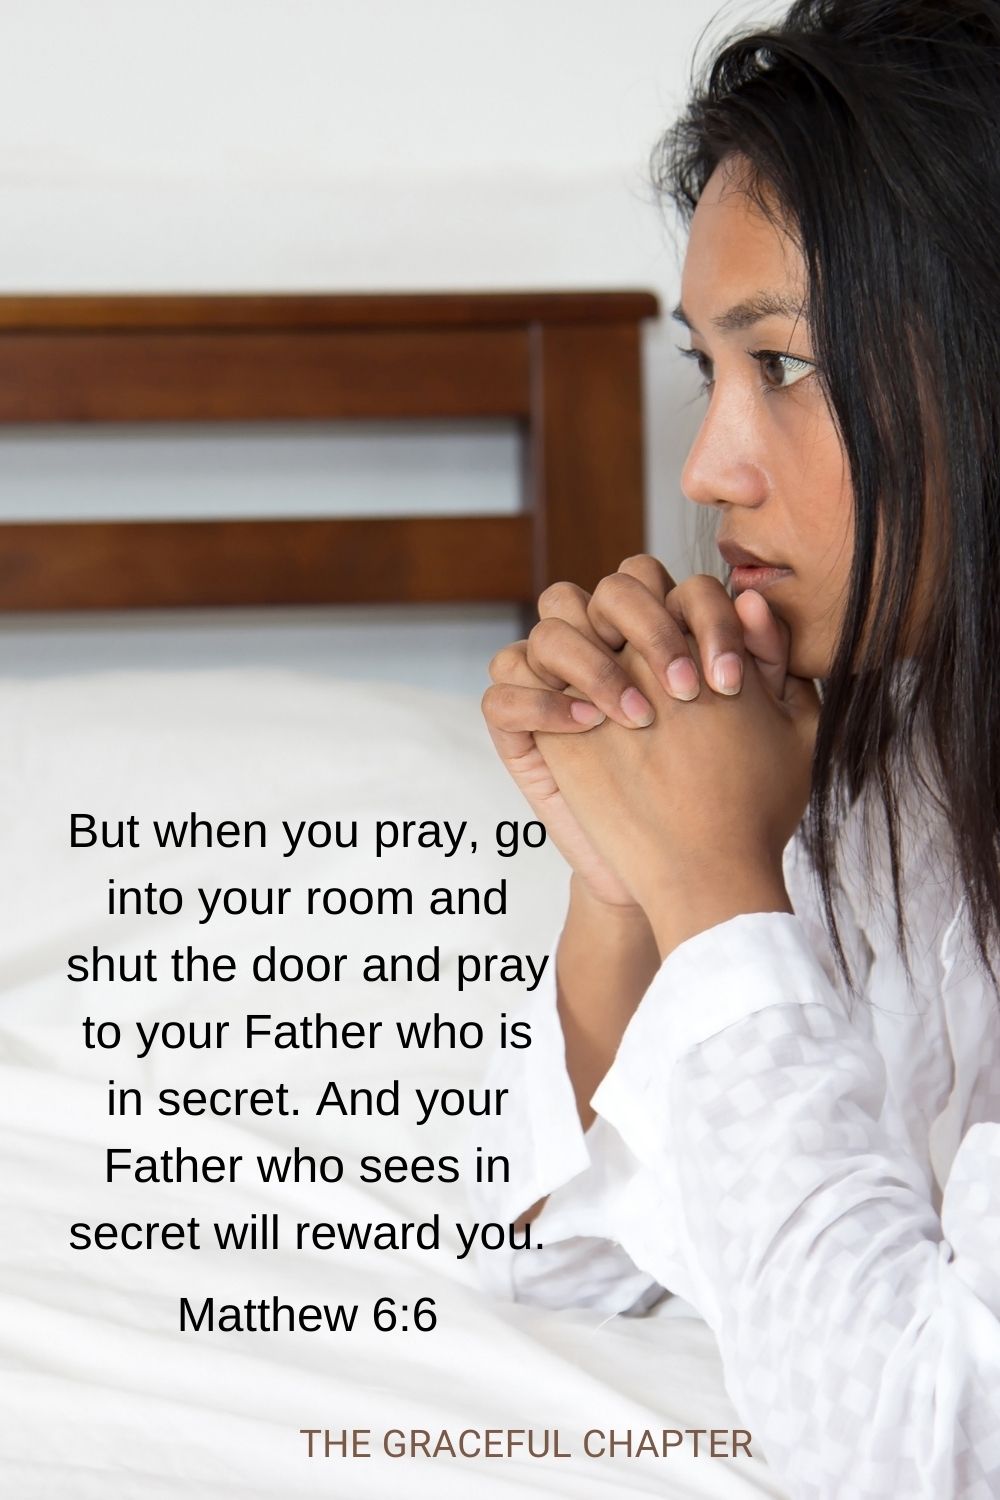 But when you pray, go into your room and shut the door and pray to your Father who is in secret. And your Father who sees in secret will reward you. Matthew 6:6